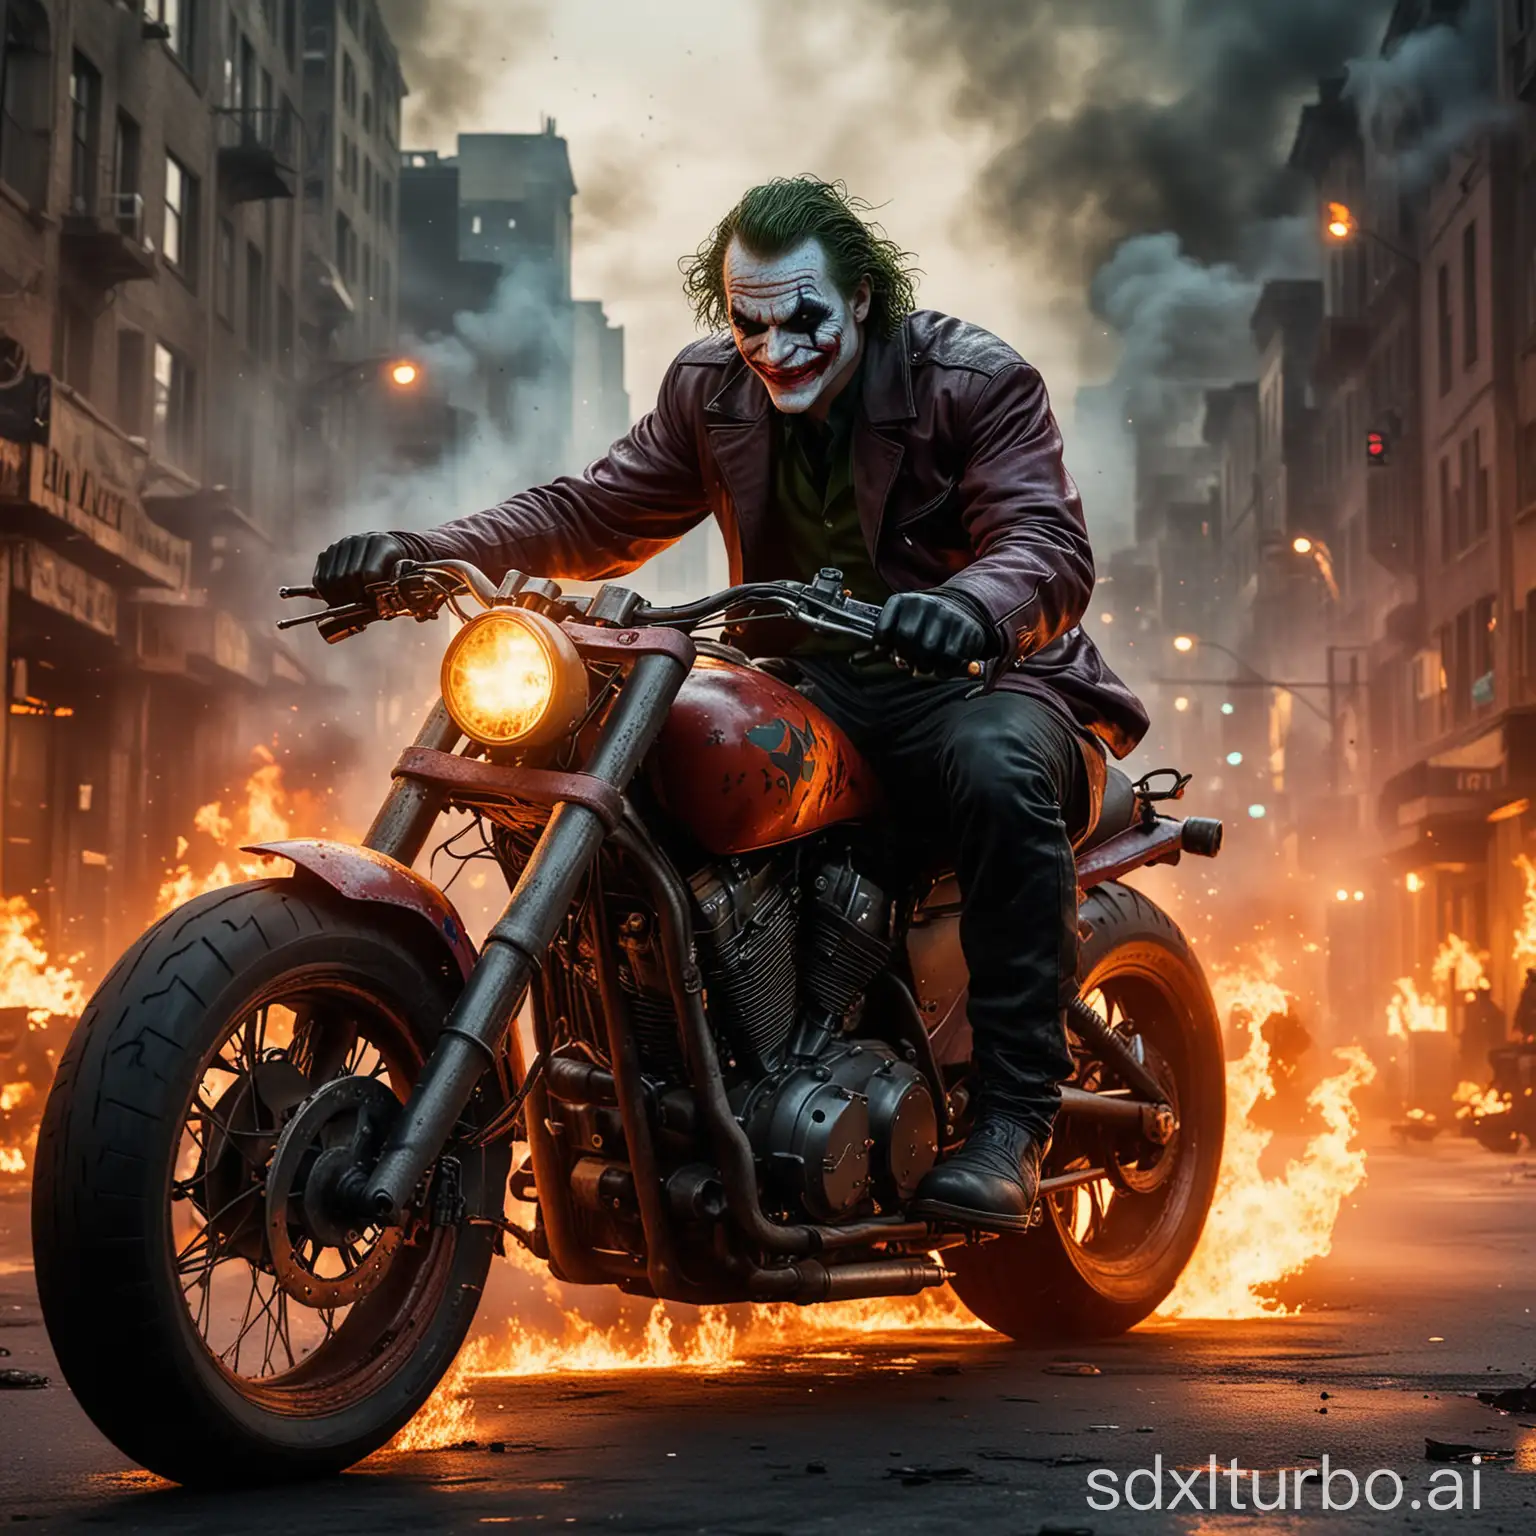 Motorcycles go, The Joker from Batman sits on the motorcycle, the motorcycle is red and he drives through a burning city